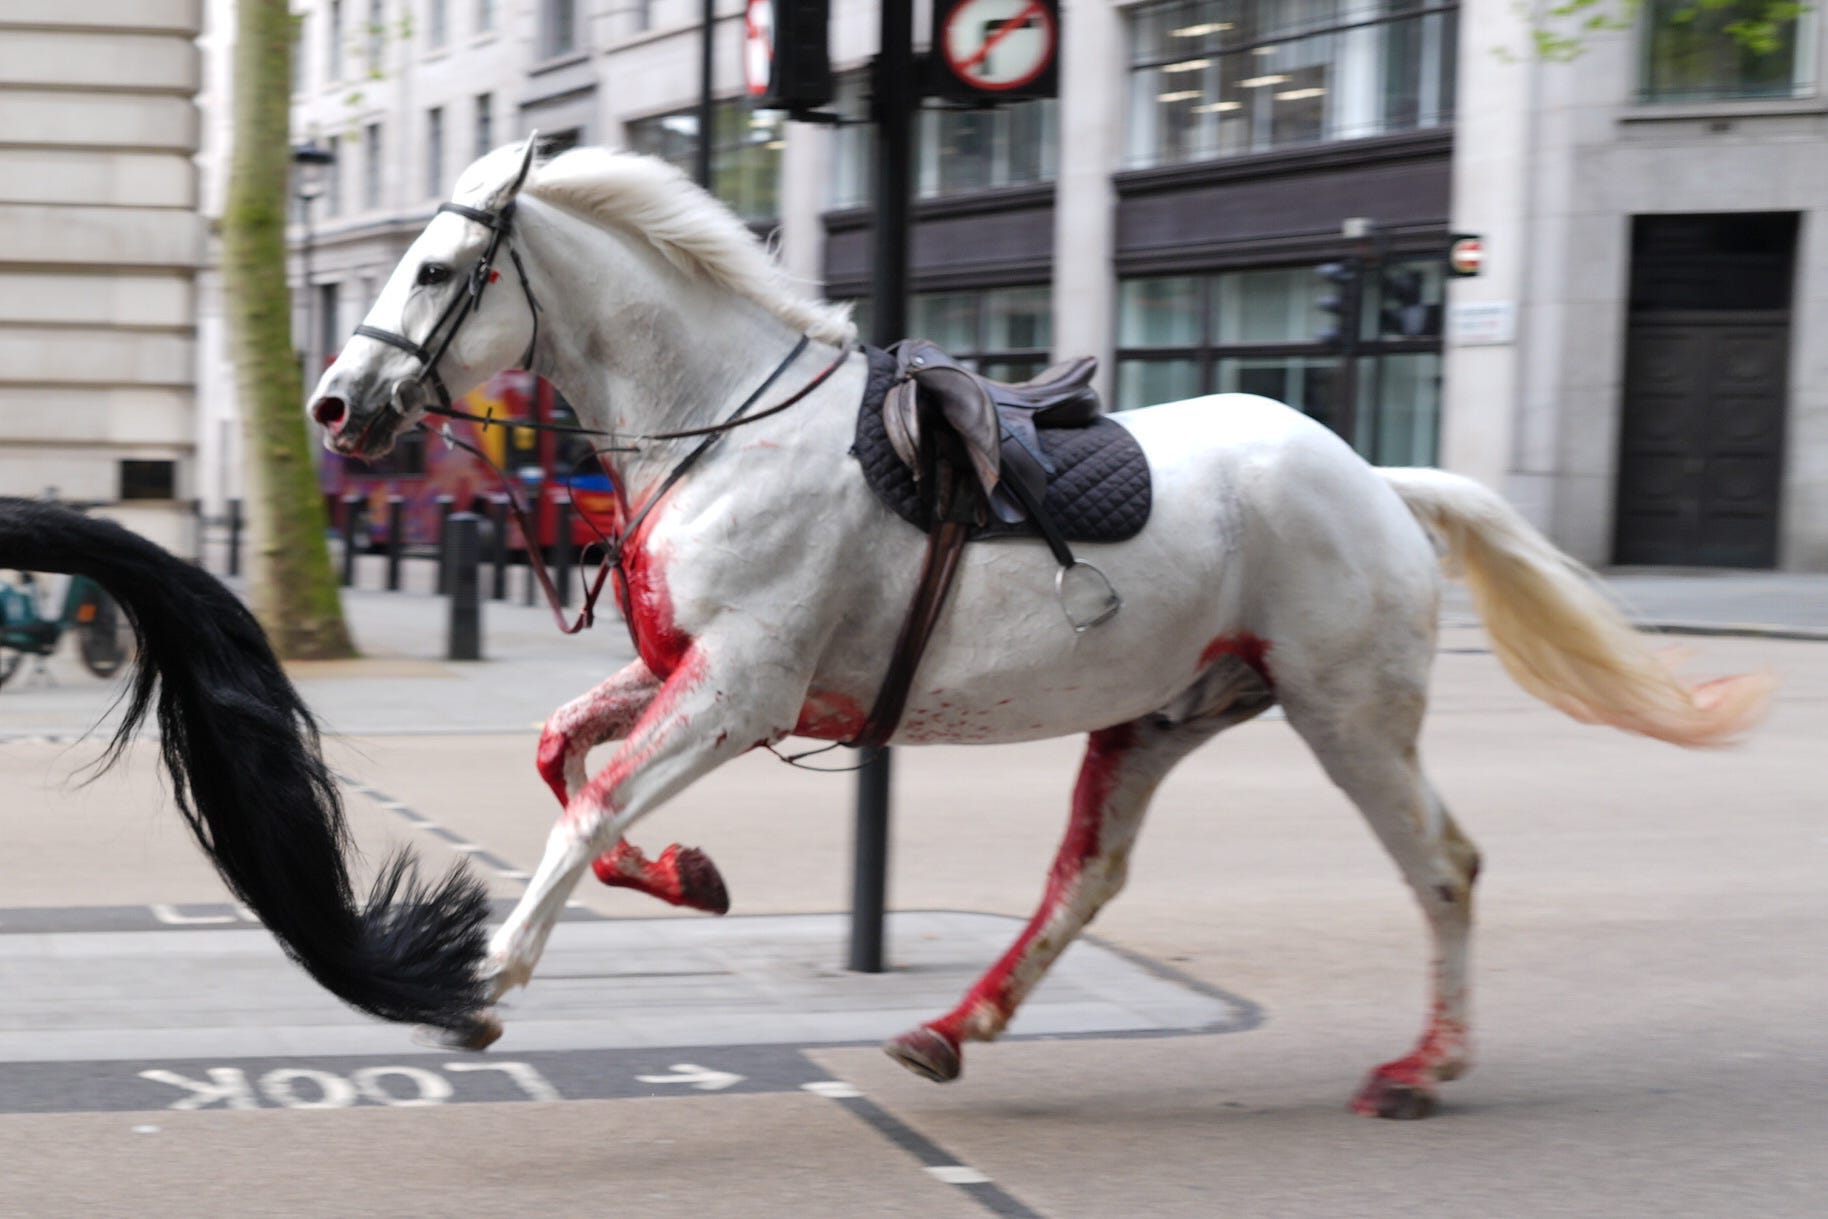 Military horses caused chaos in central London after they were spooked by builders moving rubble